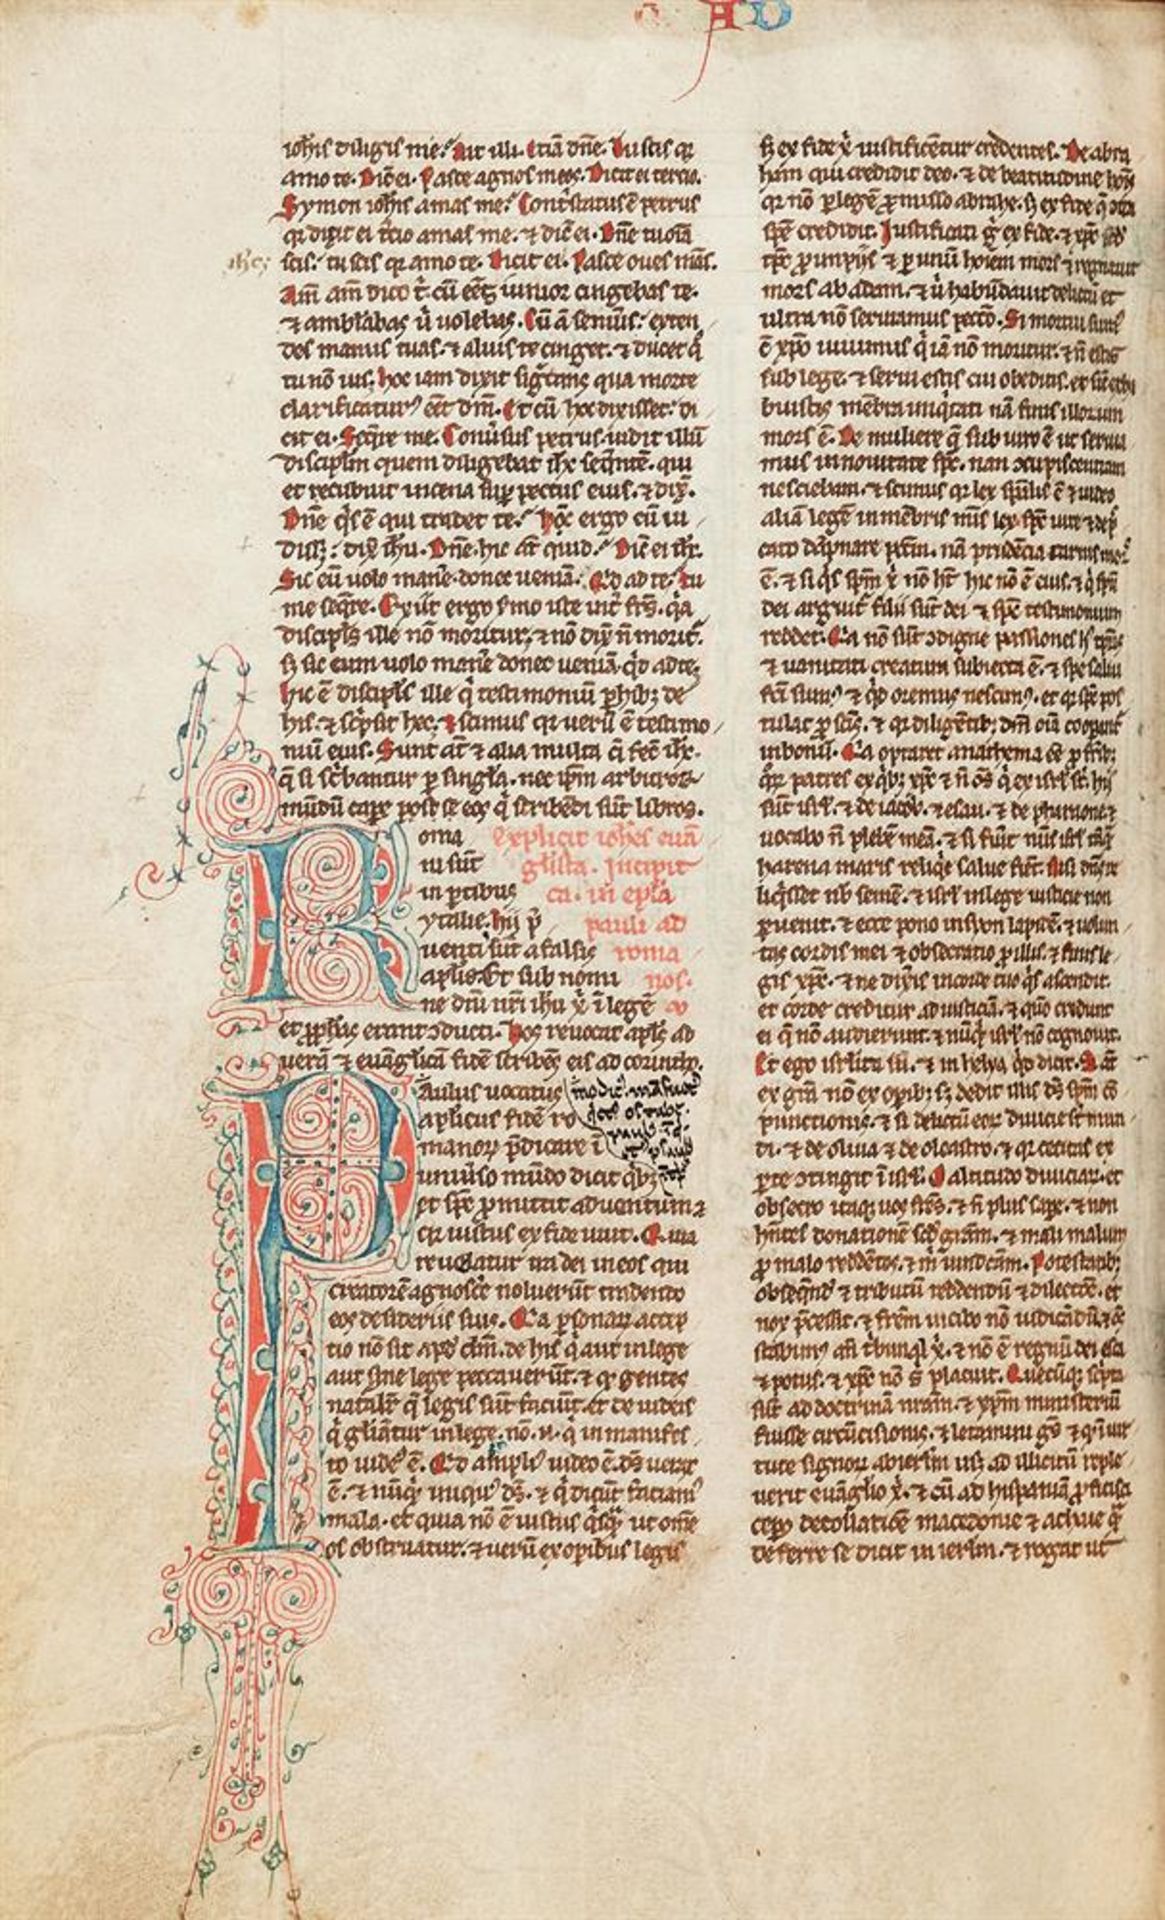 Ɵ The Bishop Carr Bible, in Latin, decorated manuscript on parchment - Image 8 of 10